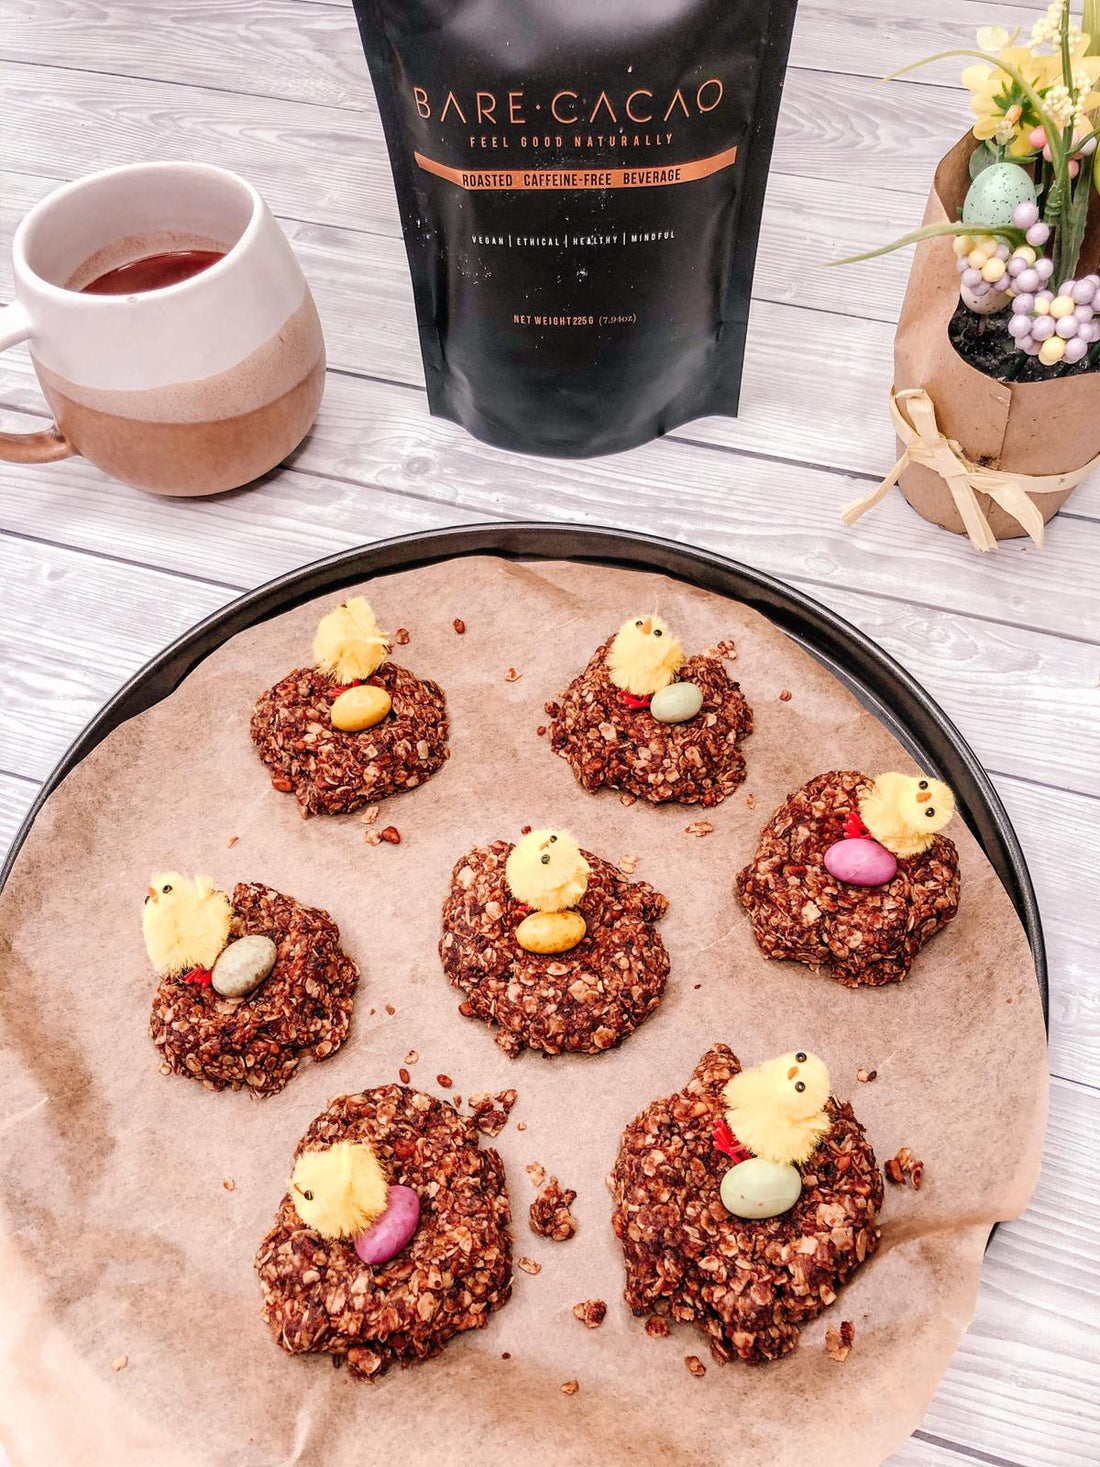 Bare Cacao Easter Nests: 5 Ingredients & 5 Minutes to Make